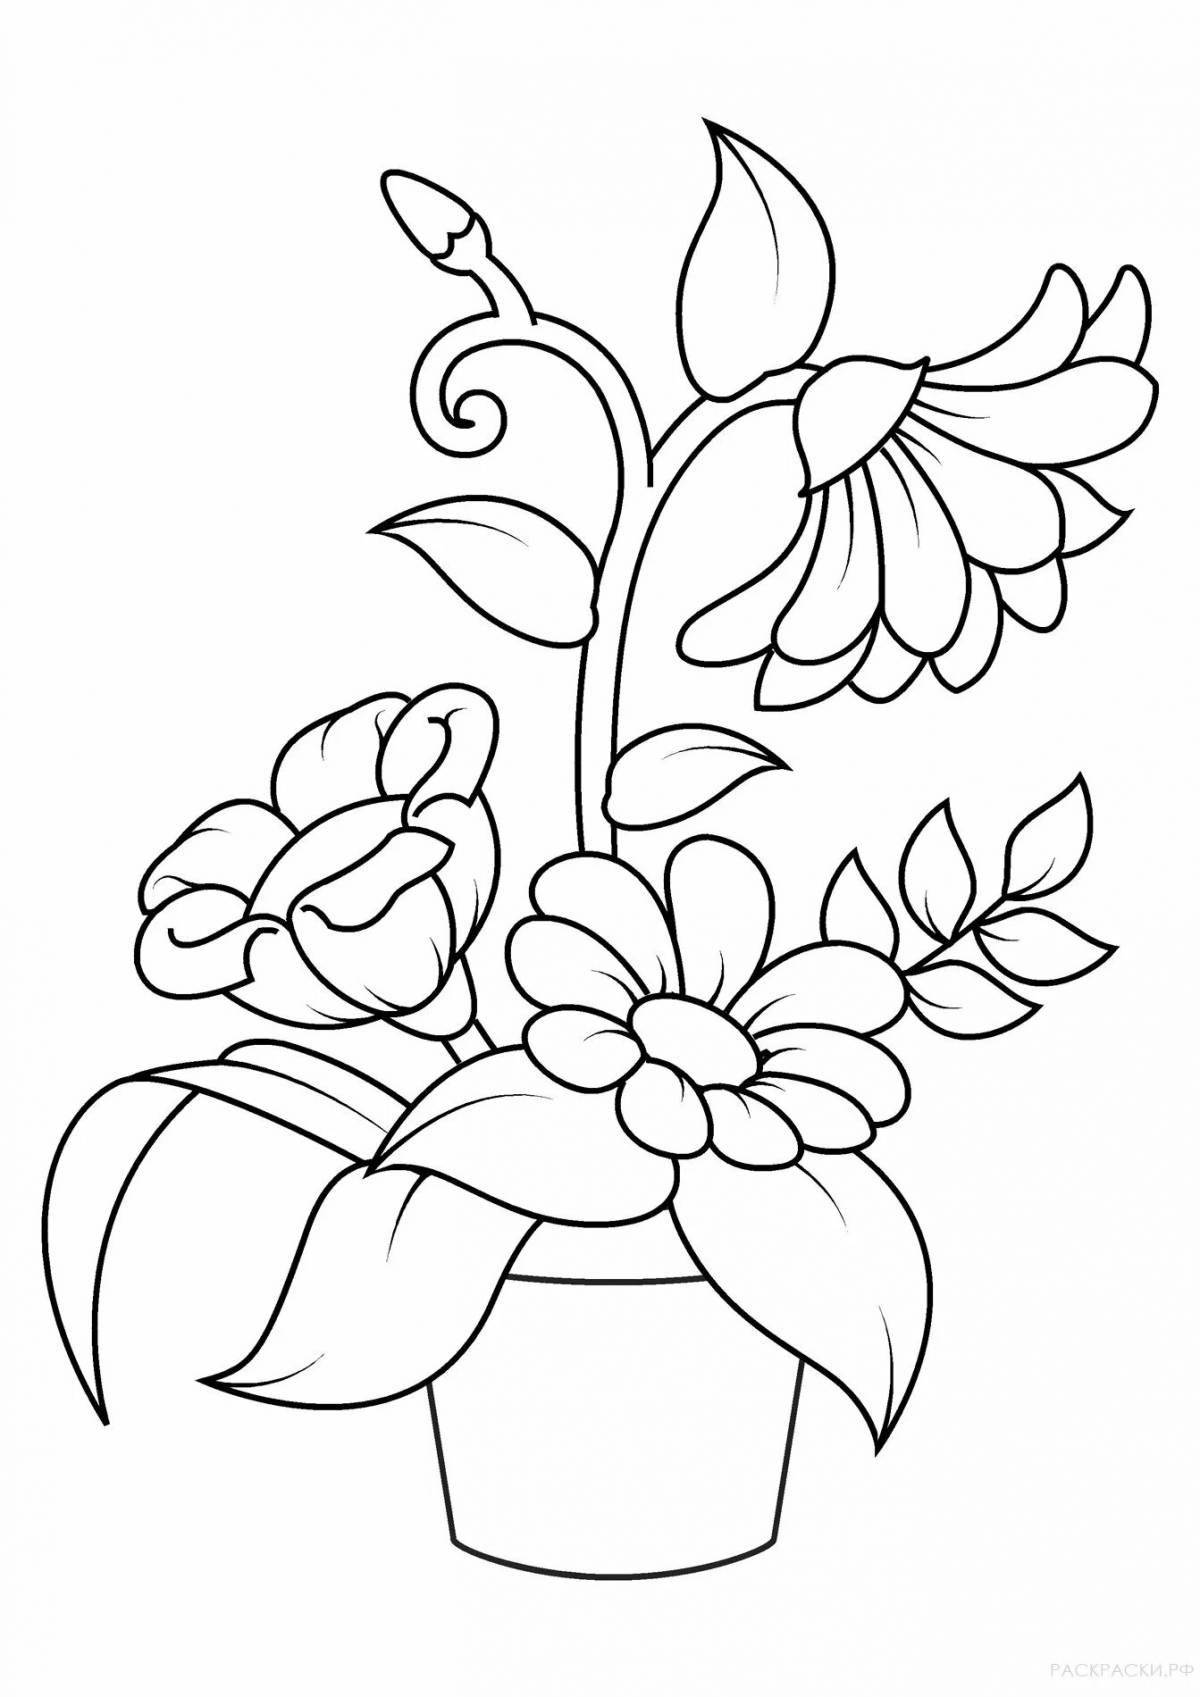 Amazing flower pot coloring page for kids